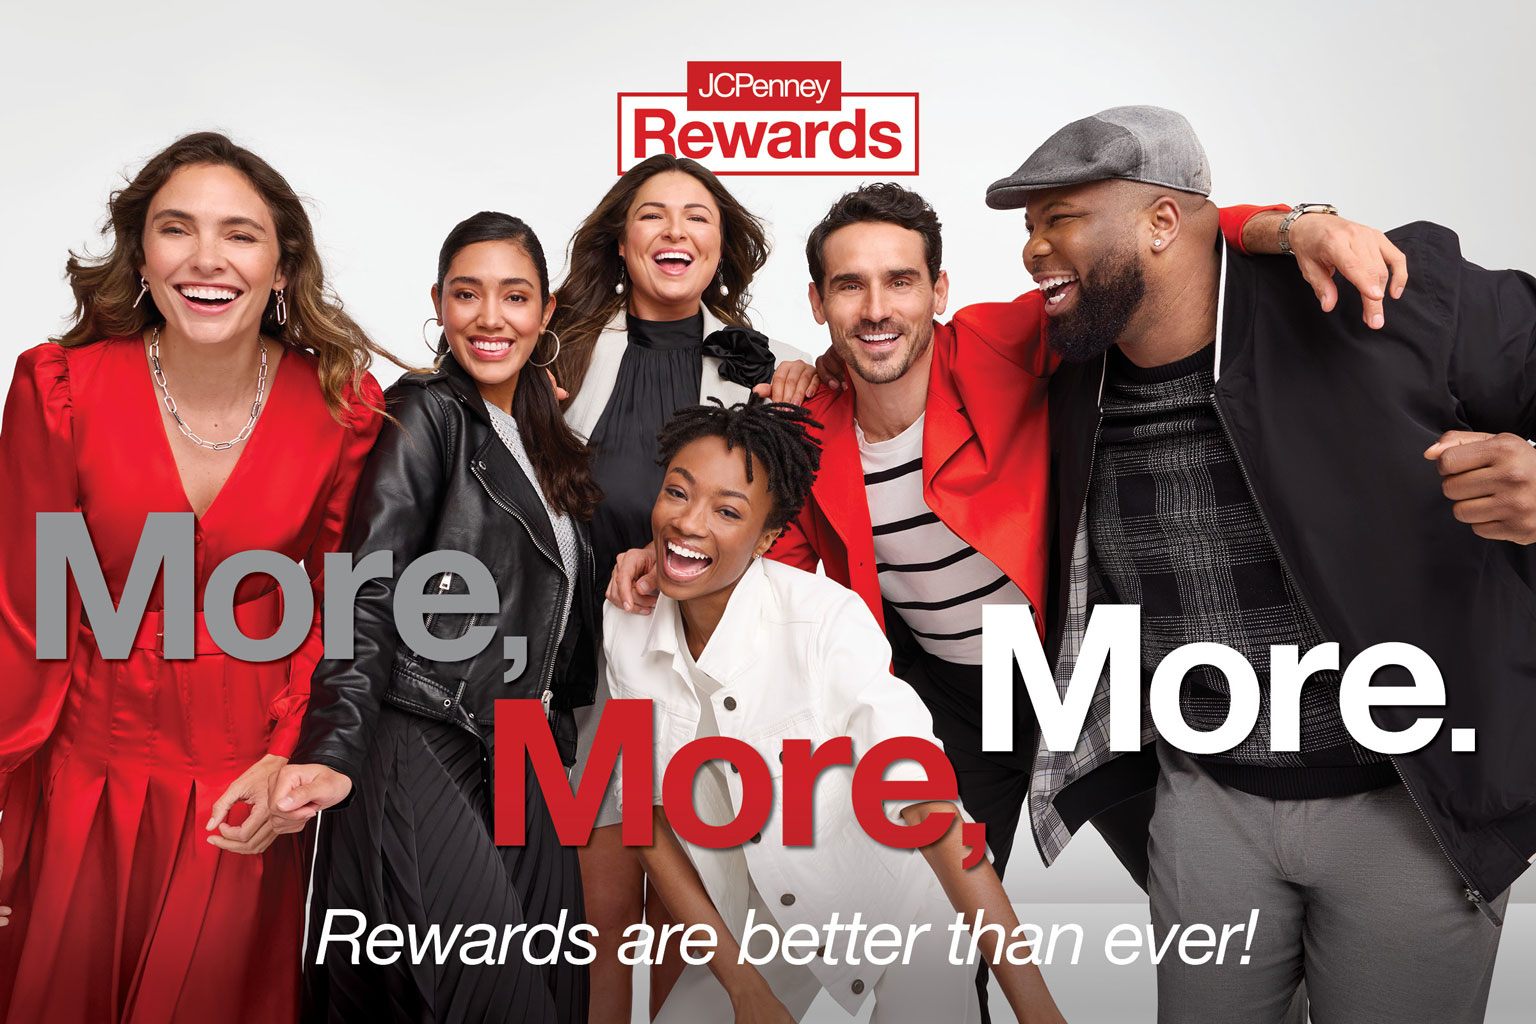 JCPenney Launches New Rewards and Credit Program Where Customers Get More, Earn More and Save More